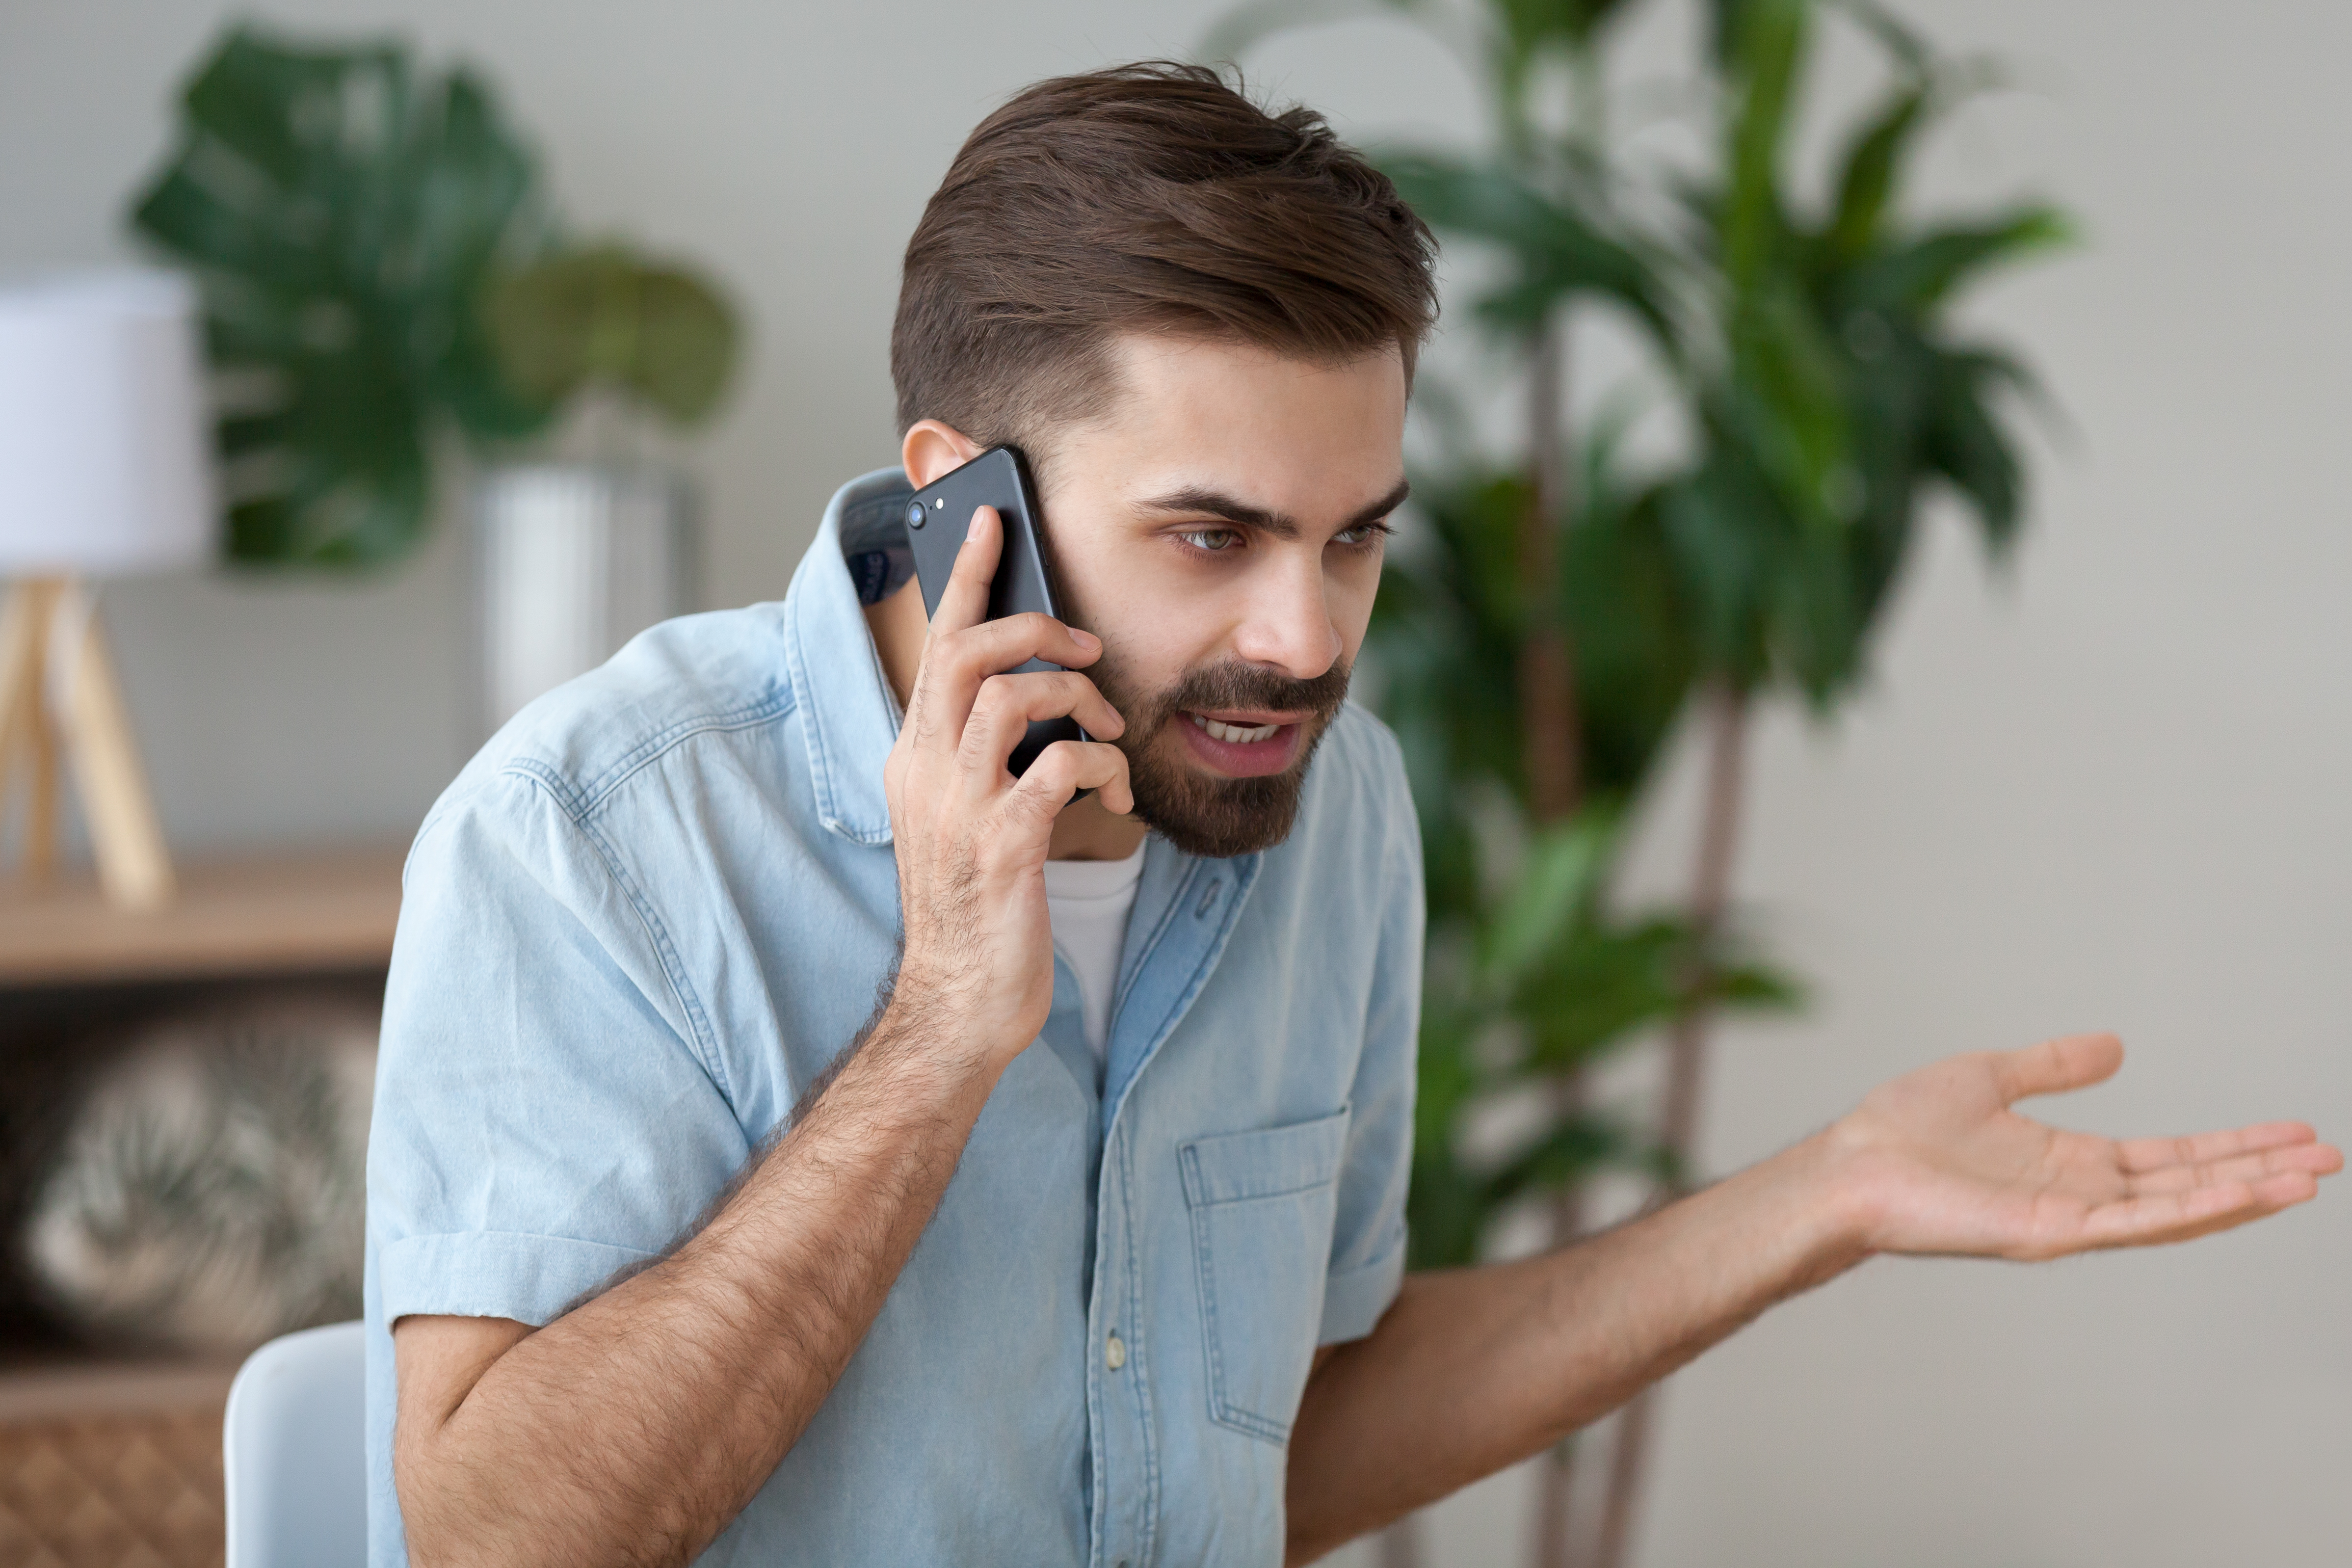 Angry man talk on smartphone arguing or solving problem. | Source: Shutterstock